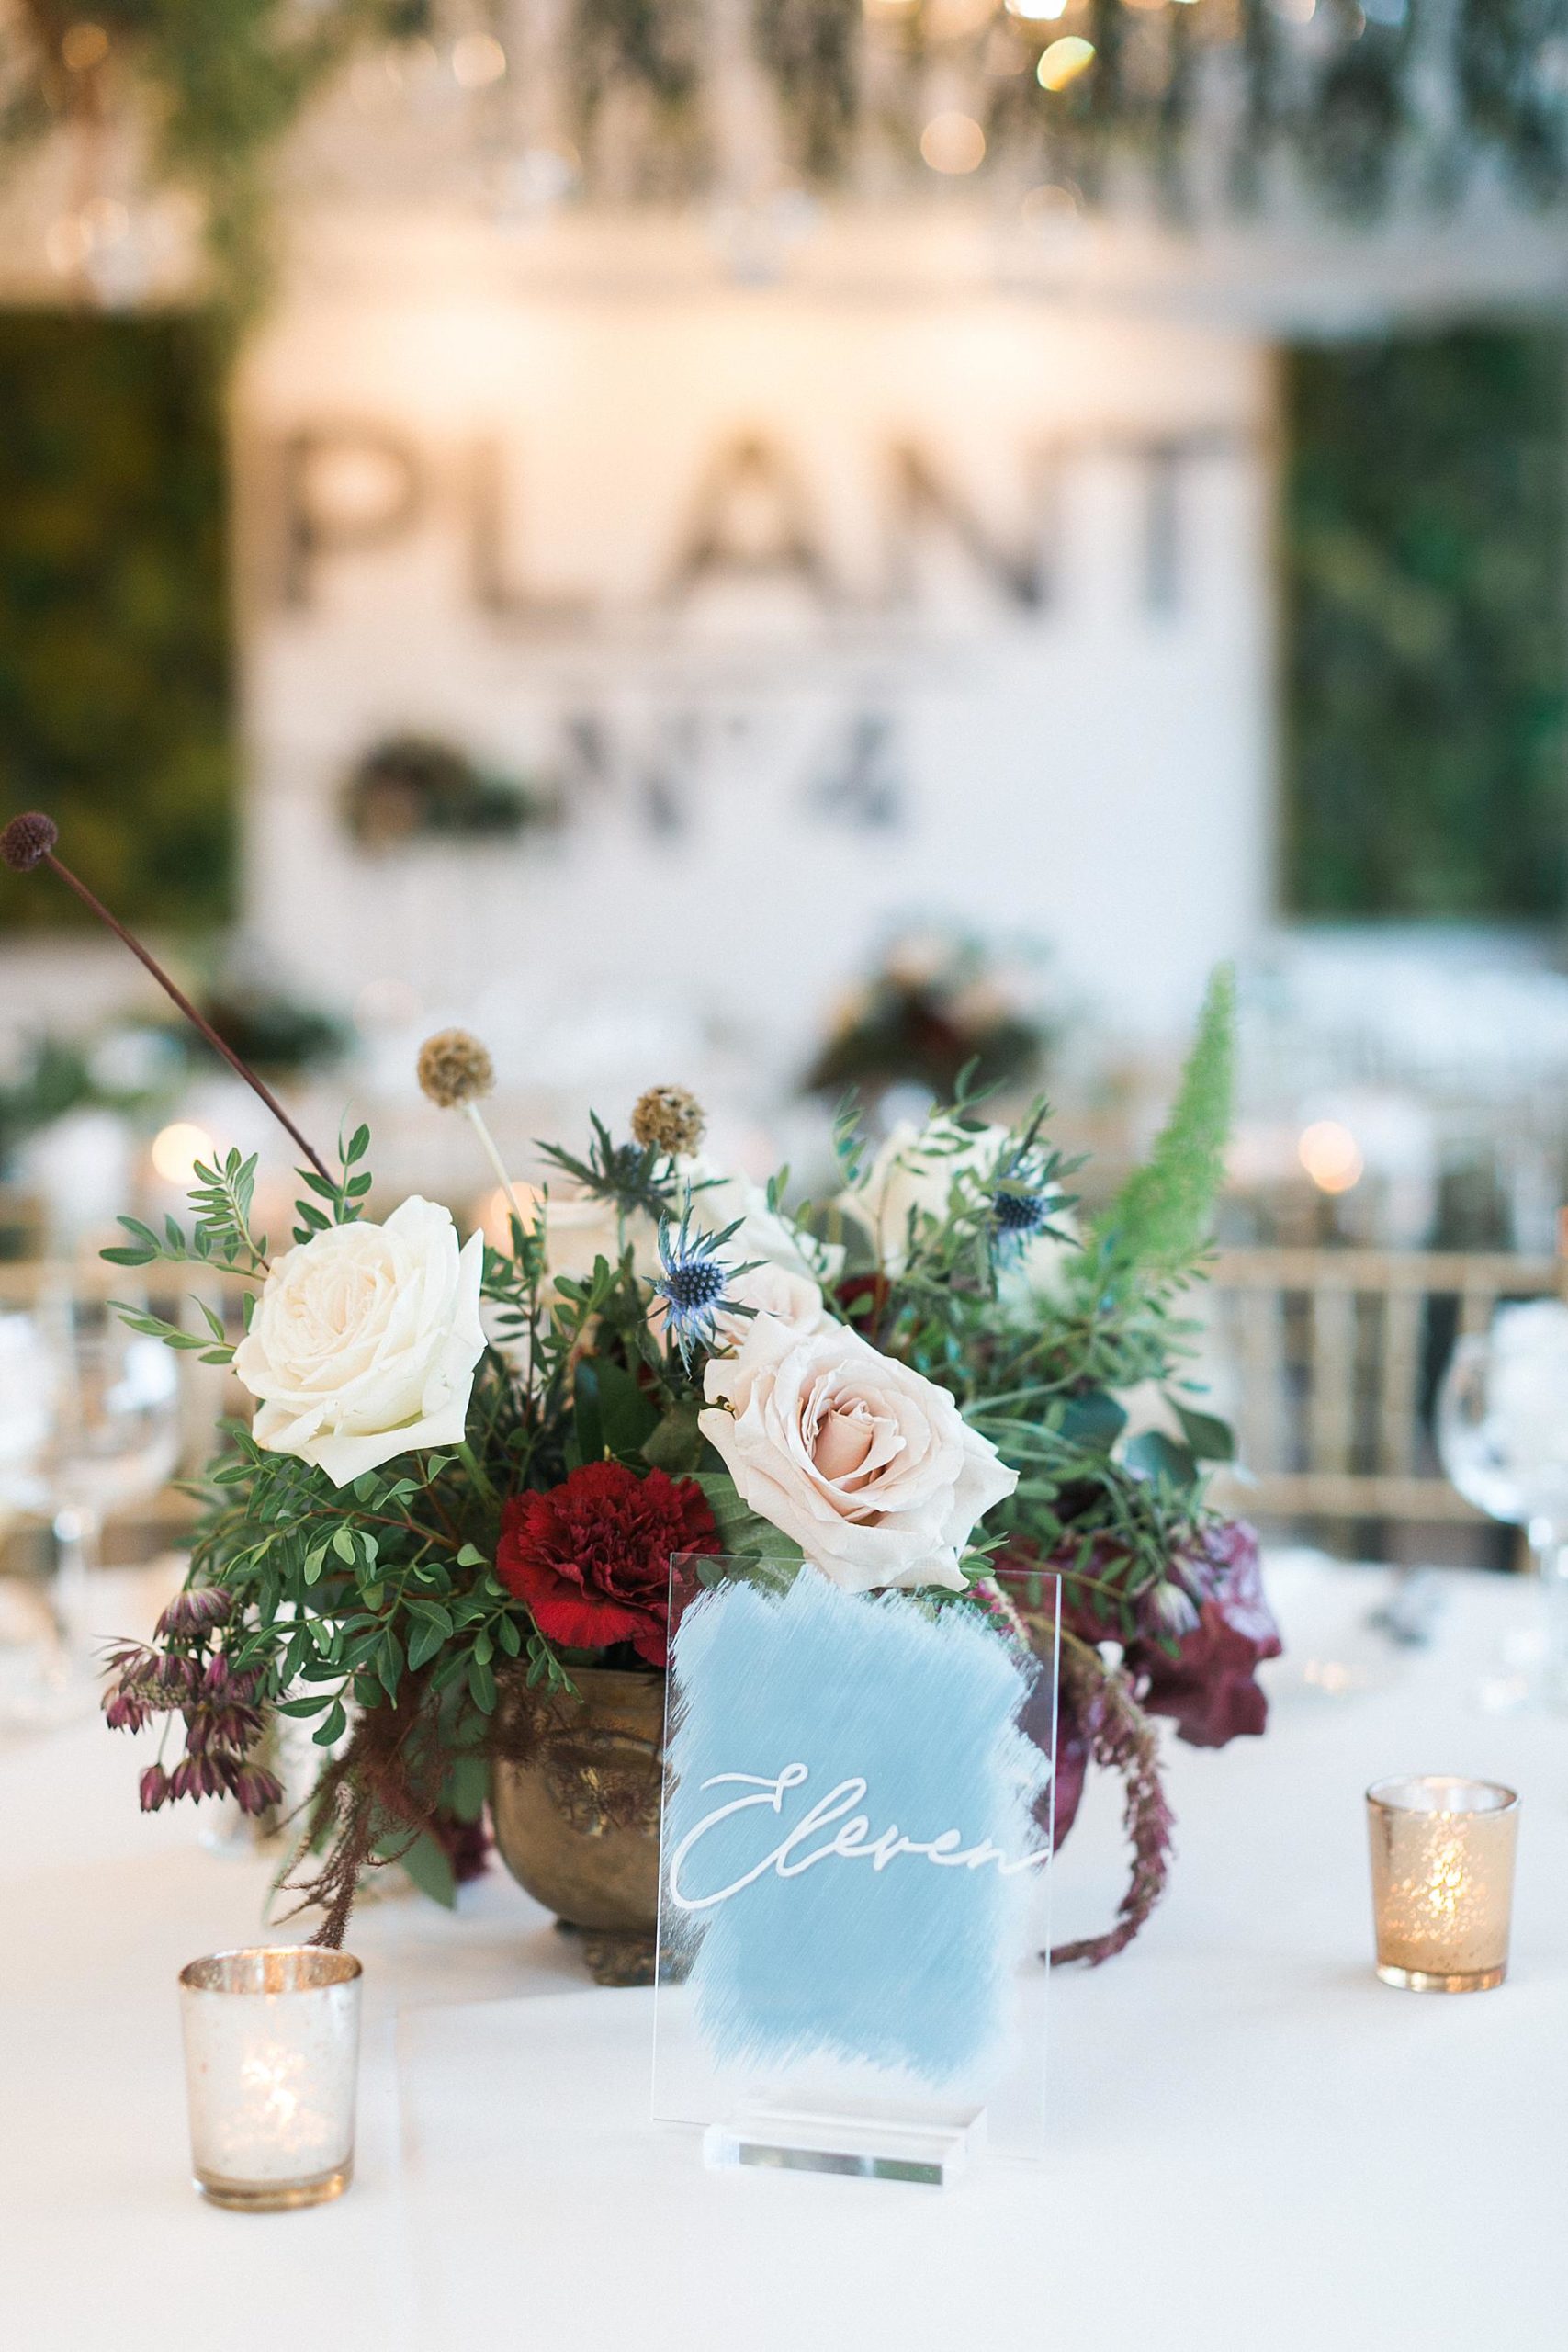 jewel-toned red and blue wedding reception decor at plant no 4 in milwaukee, wisconsin